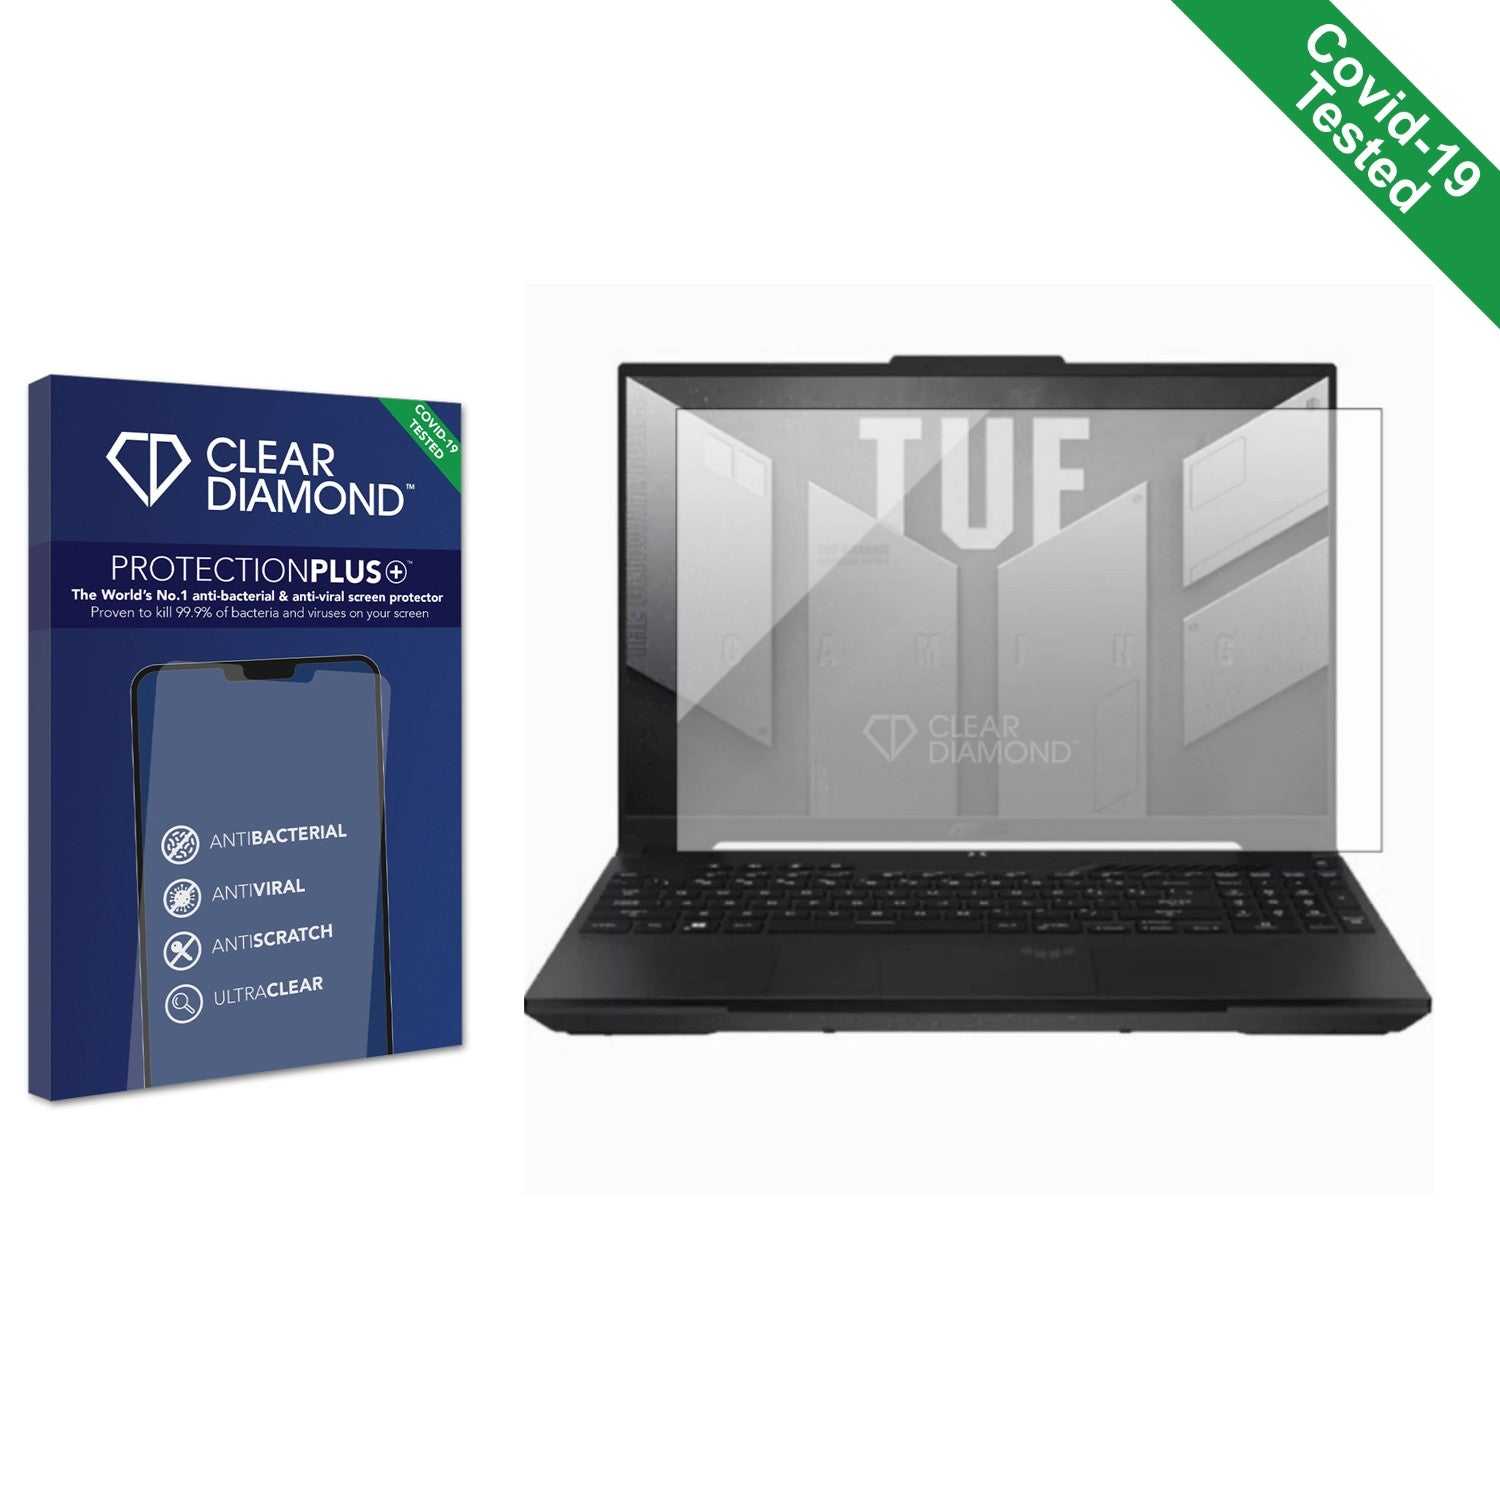 ScreenShield, Clear Diamond Anti-viral Screen Protector for ASUS TUF Gaming A16